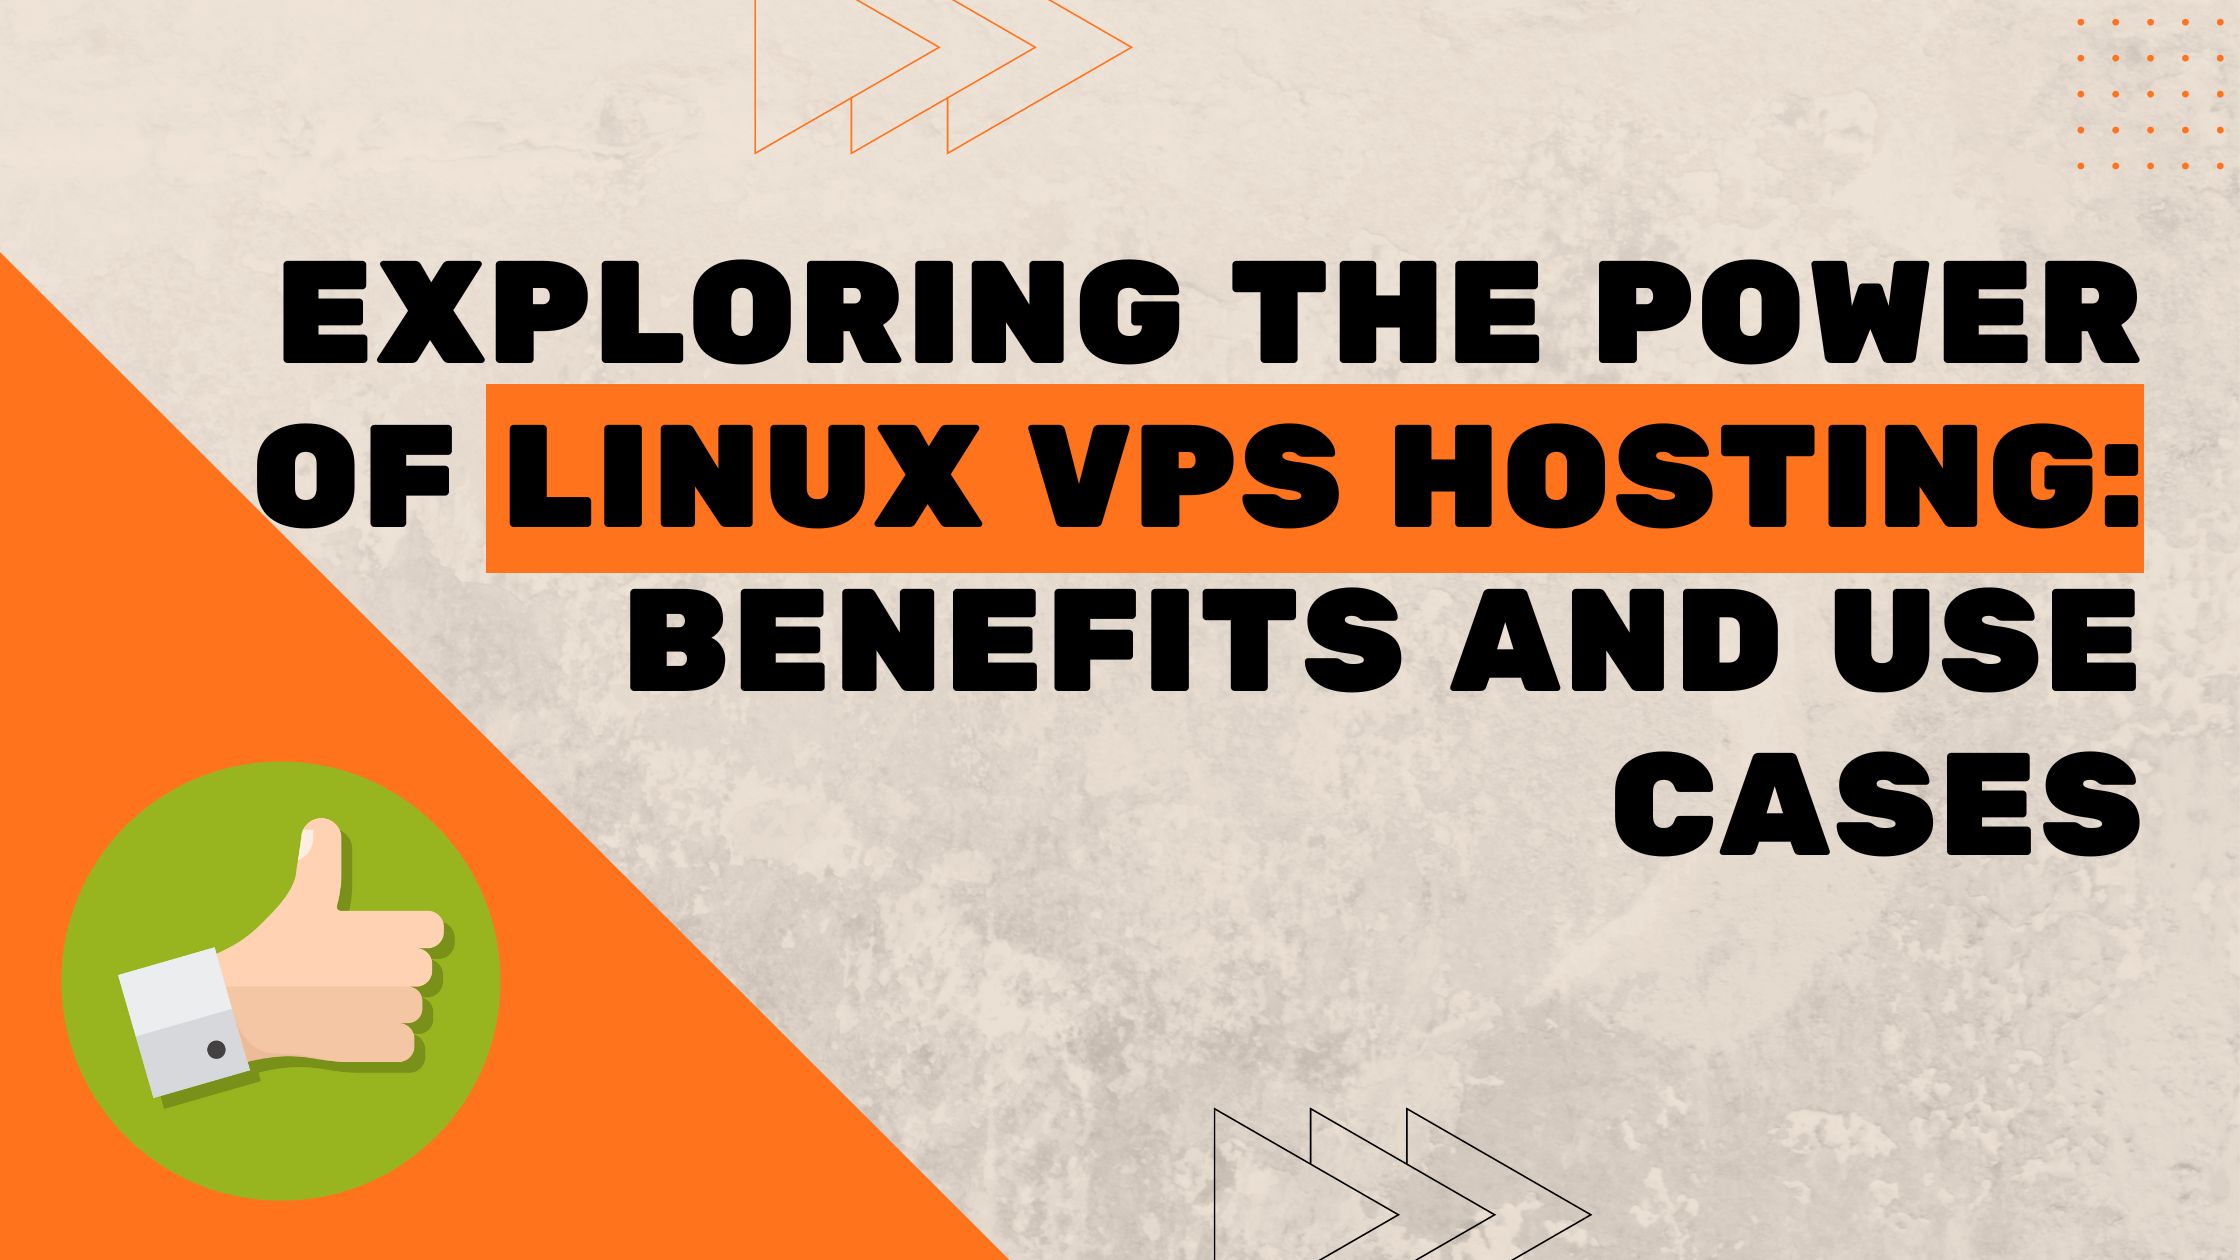 Exploring the power of Linux VPS hosting: Benefits and Use cases